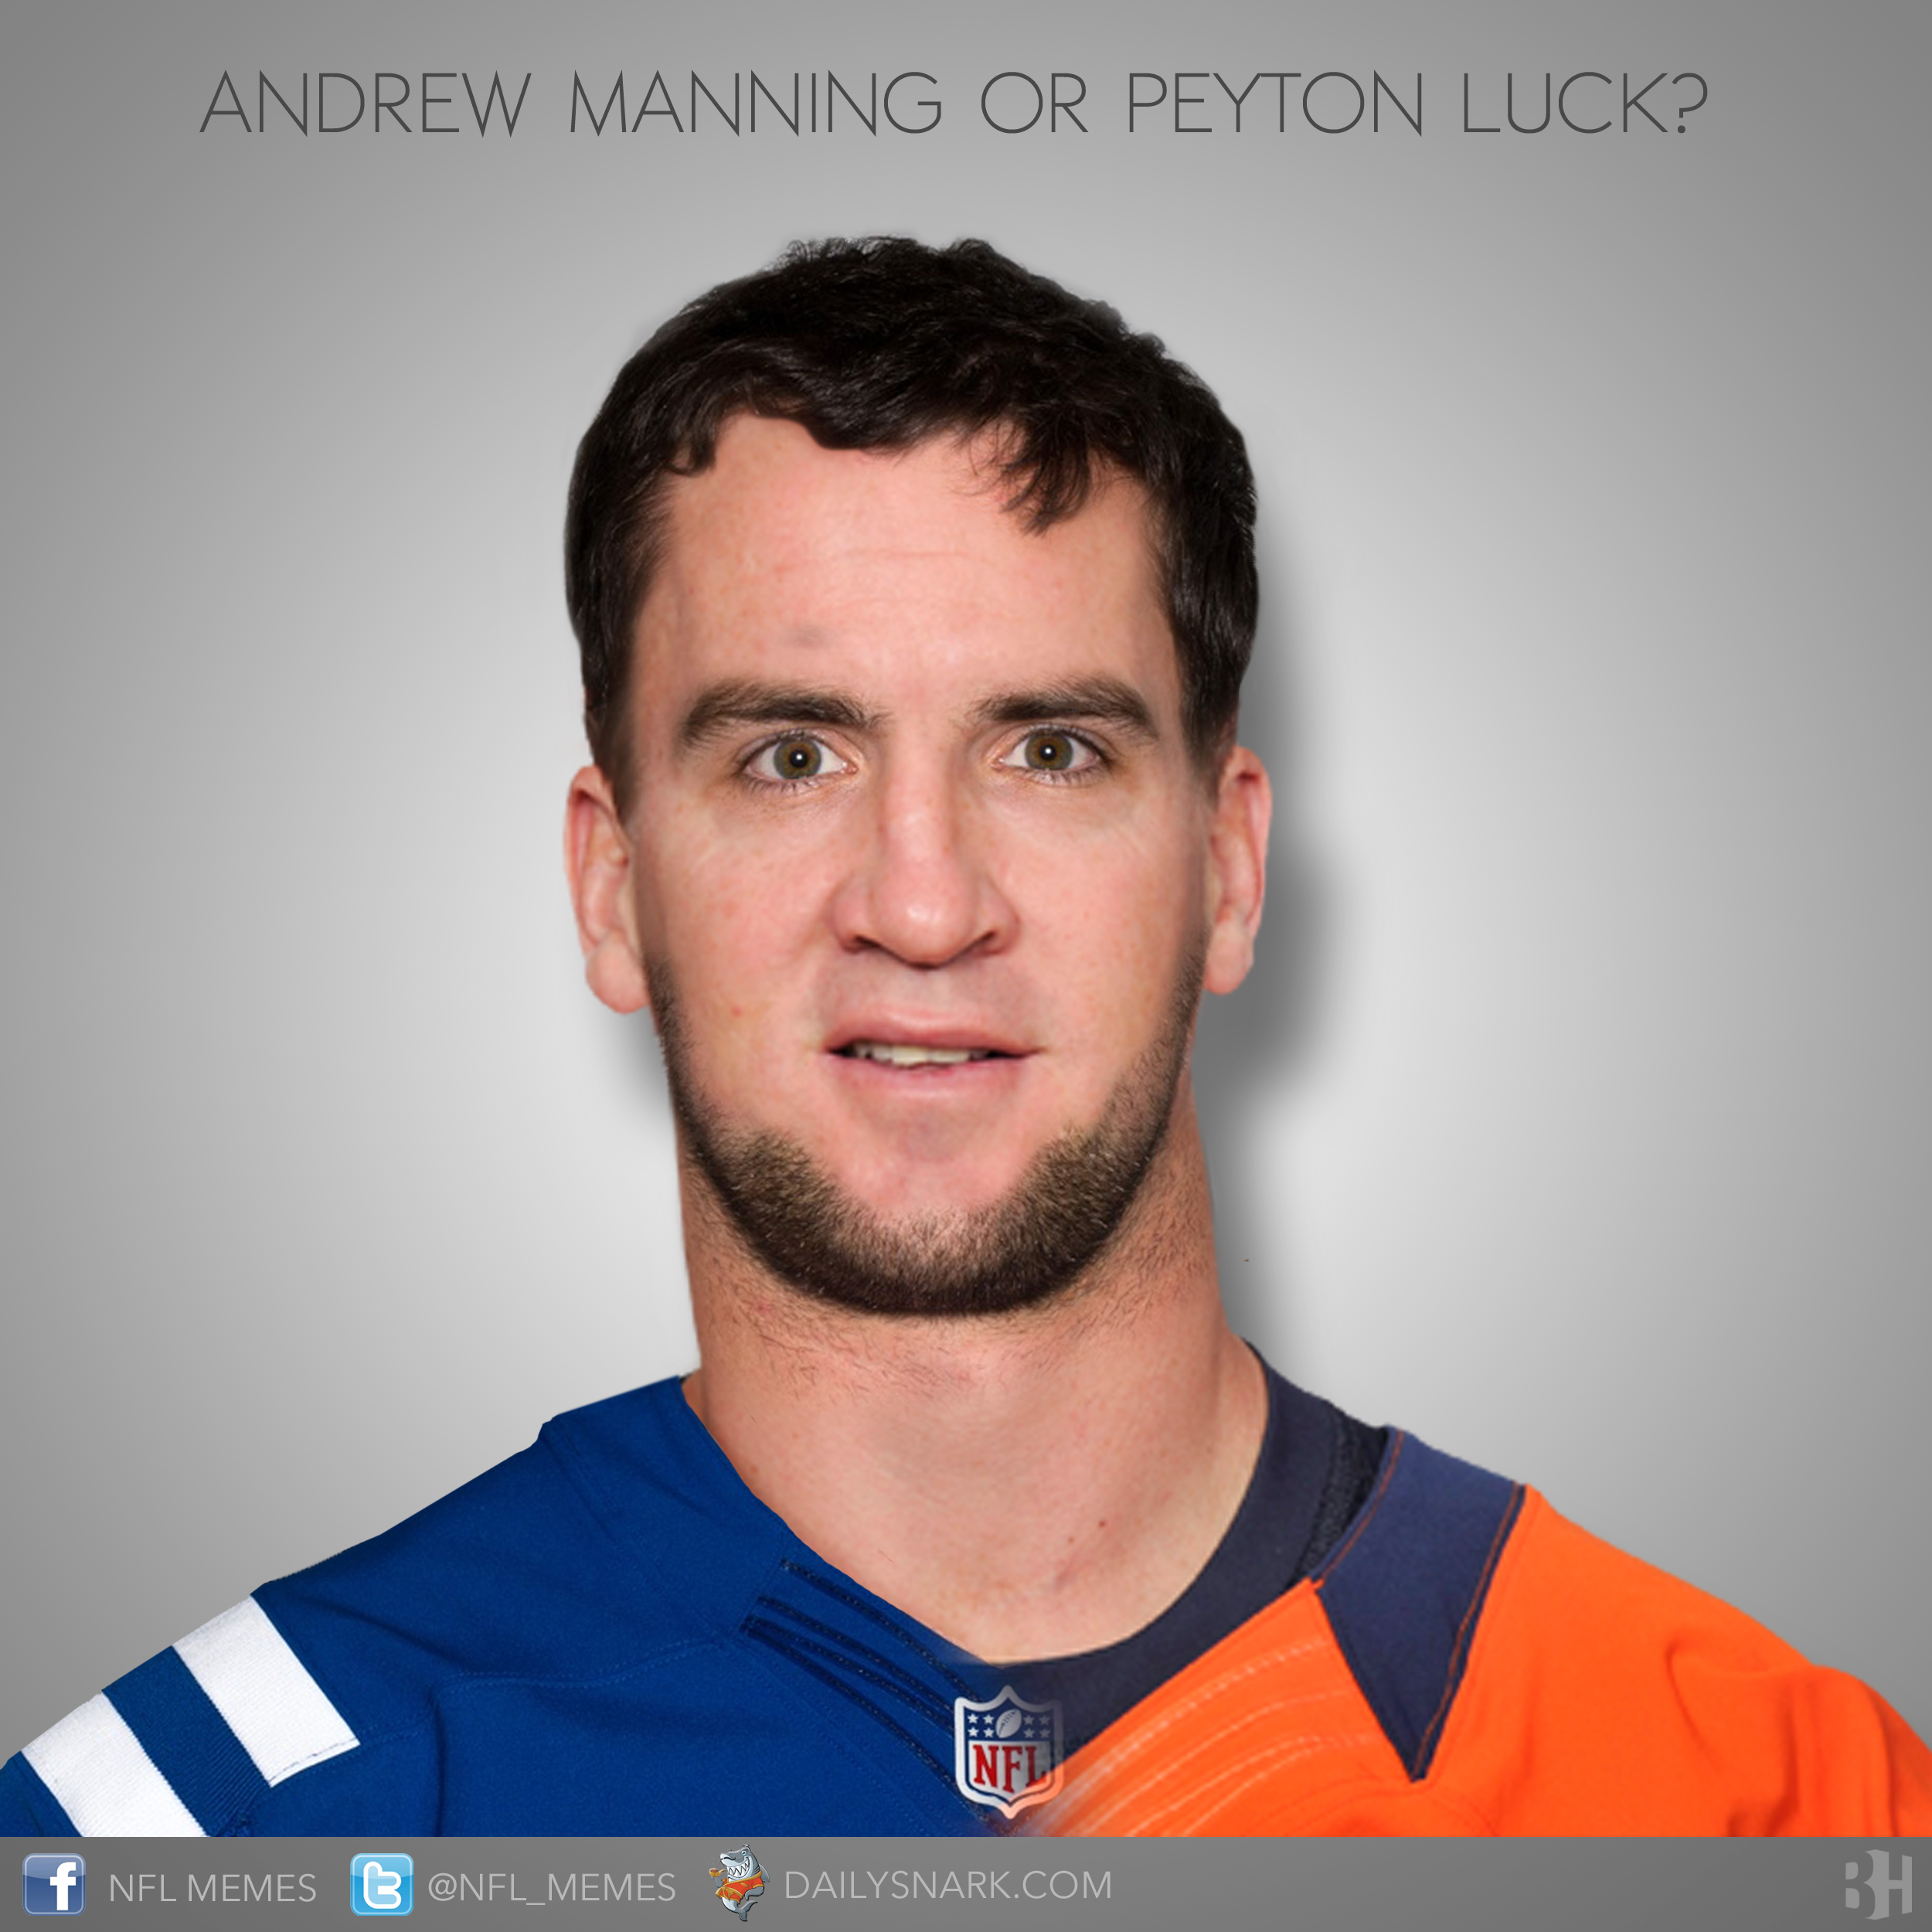 NFL Stars Morphed With Each Other - Daily Snark2500 x 2500